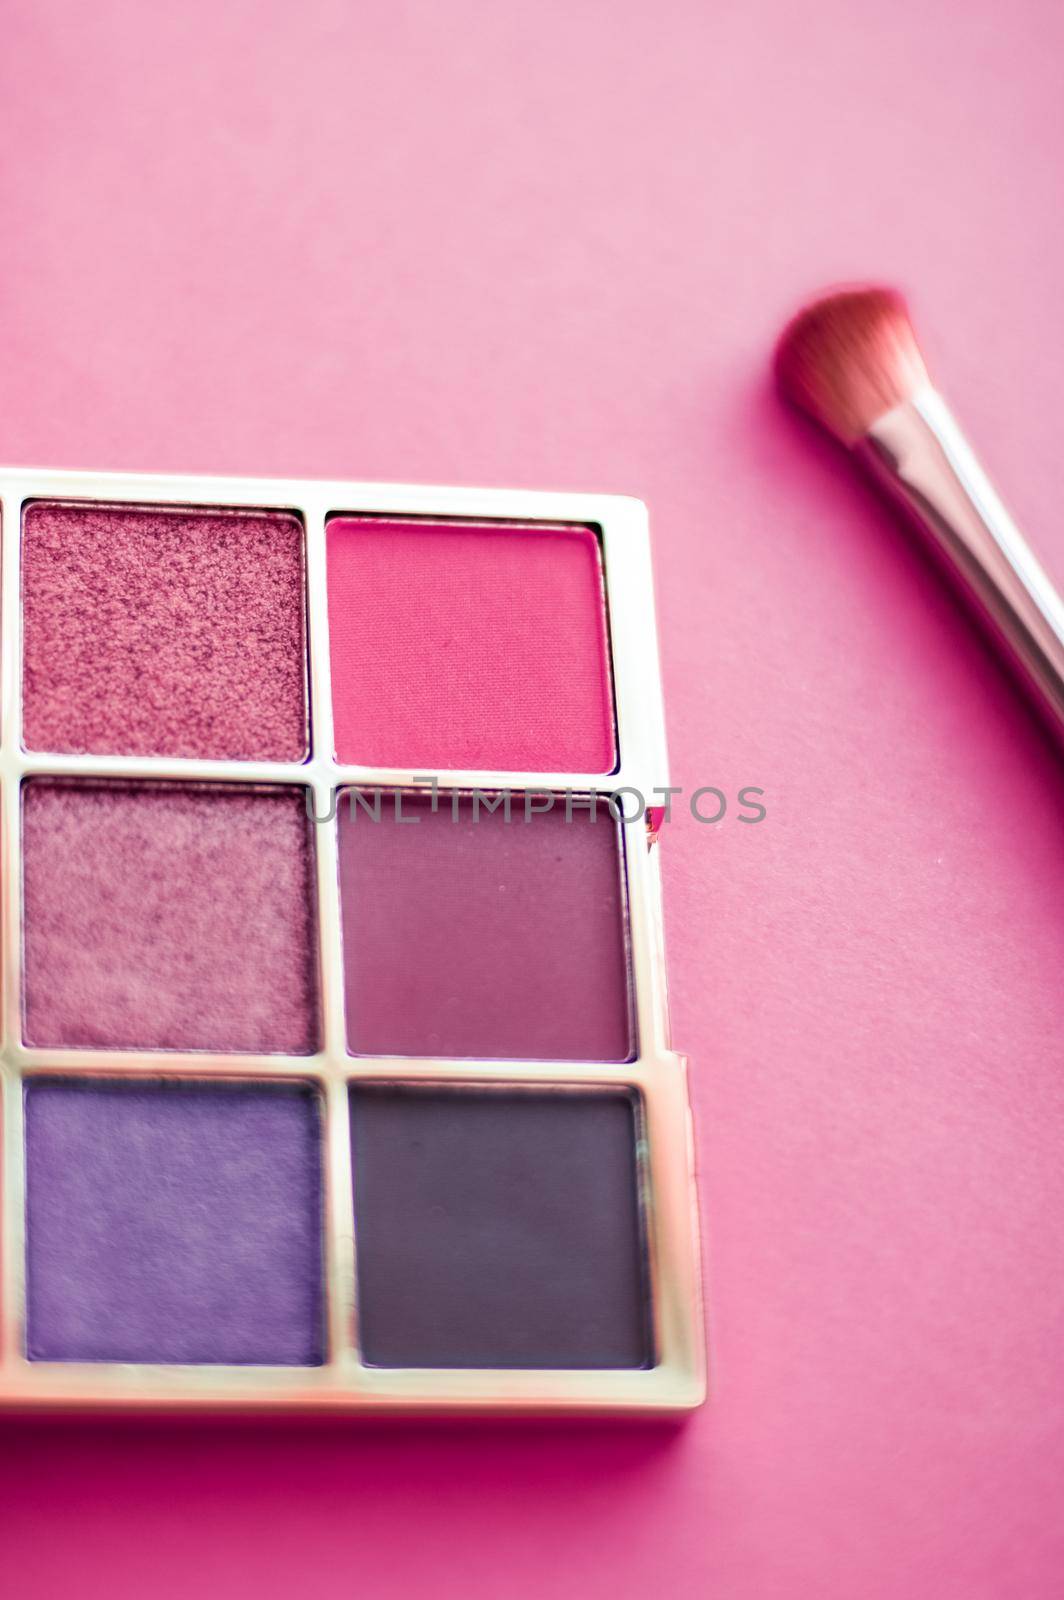 Eyeshadow palette and make-up brush on pink background, eye shadows cosmetics product as luxury beauty brand promotion and holiday fashion blog design by Anneleven